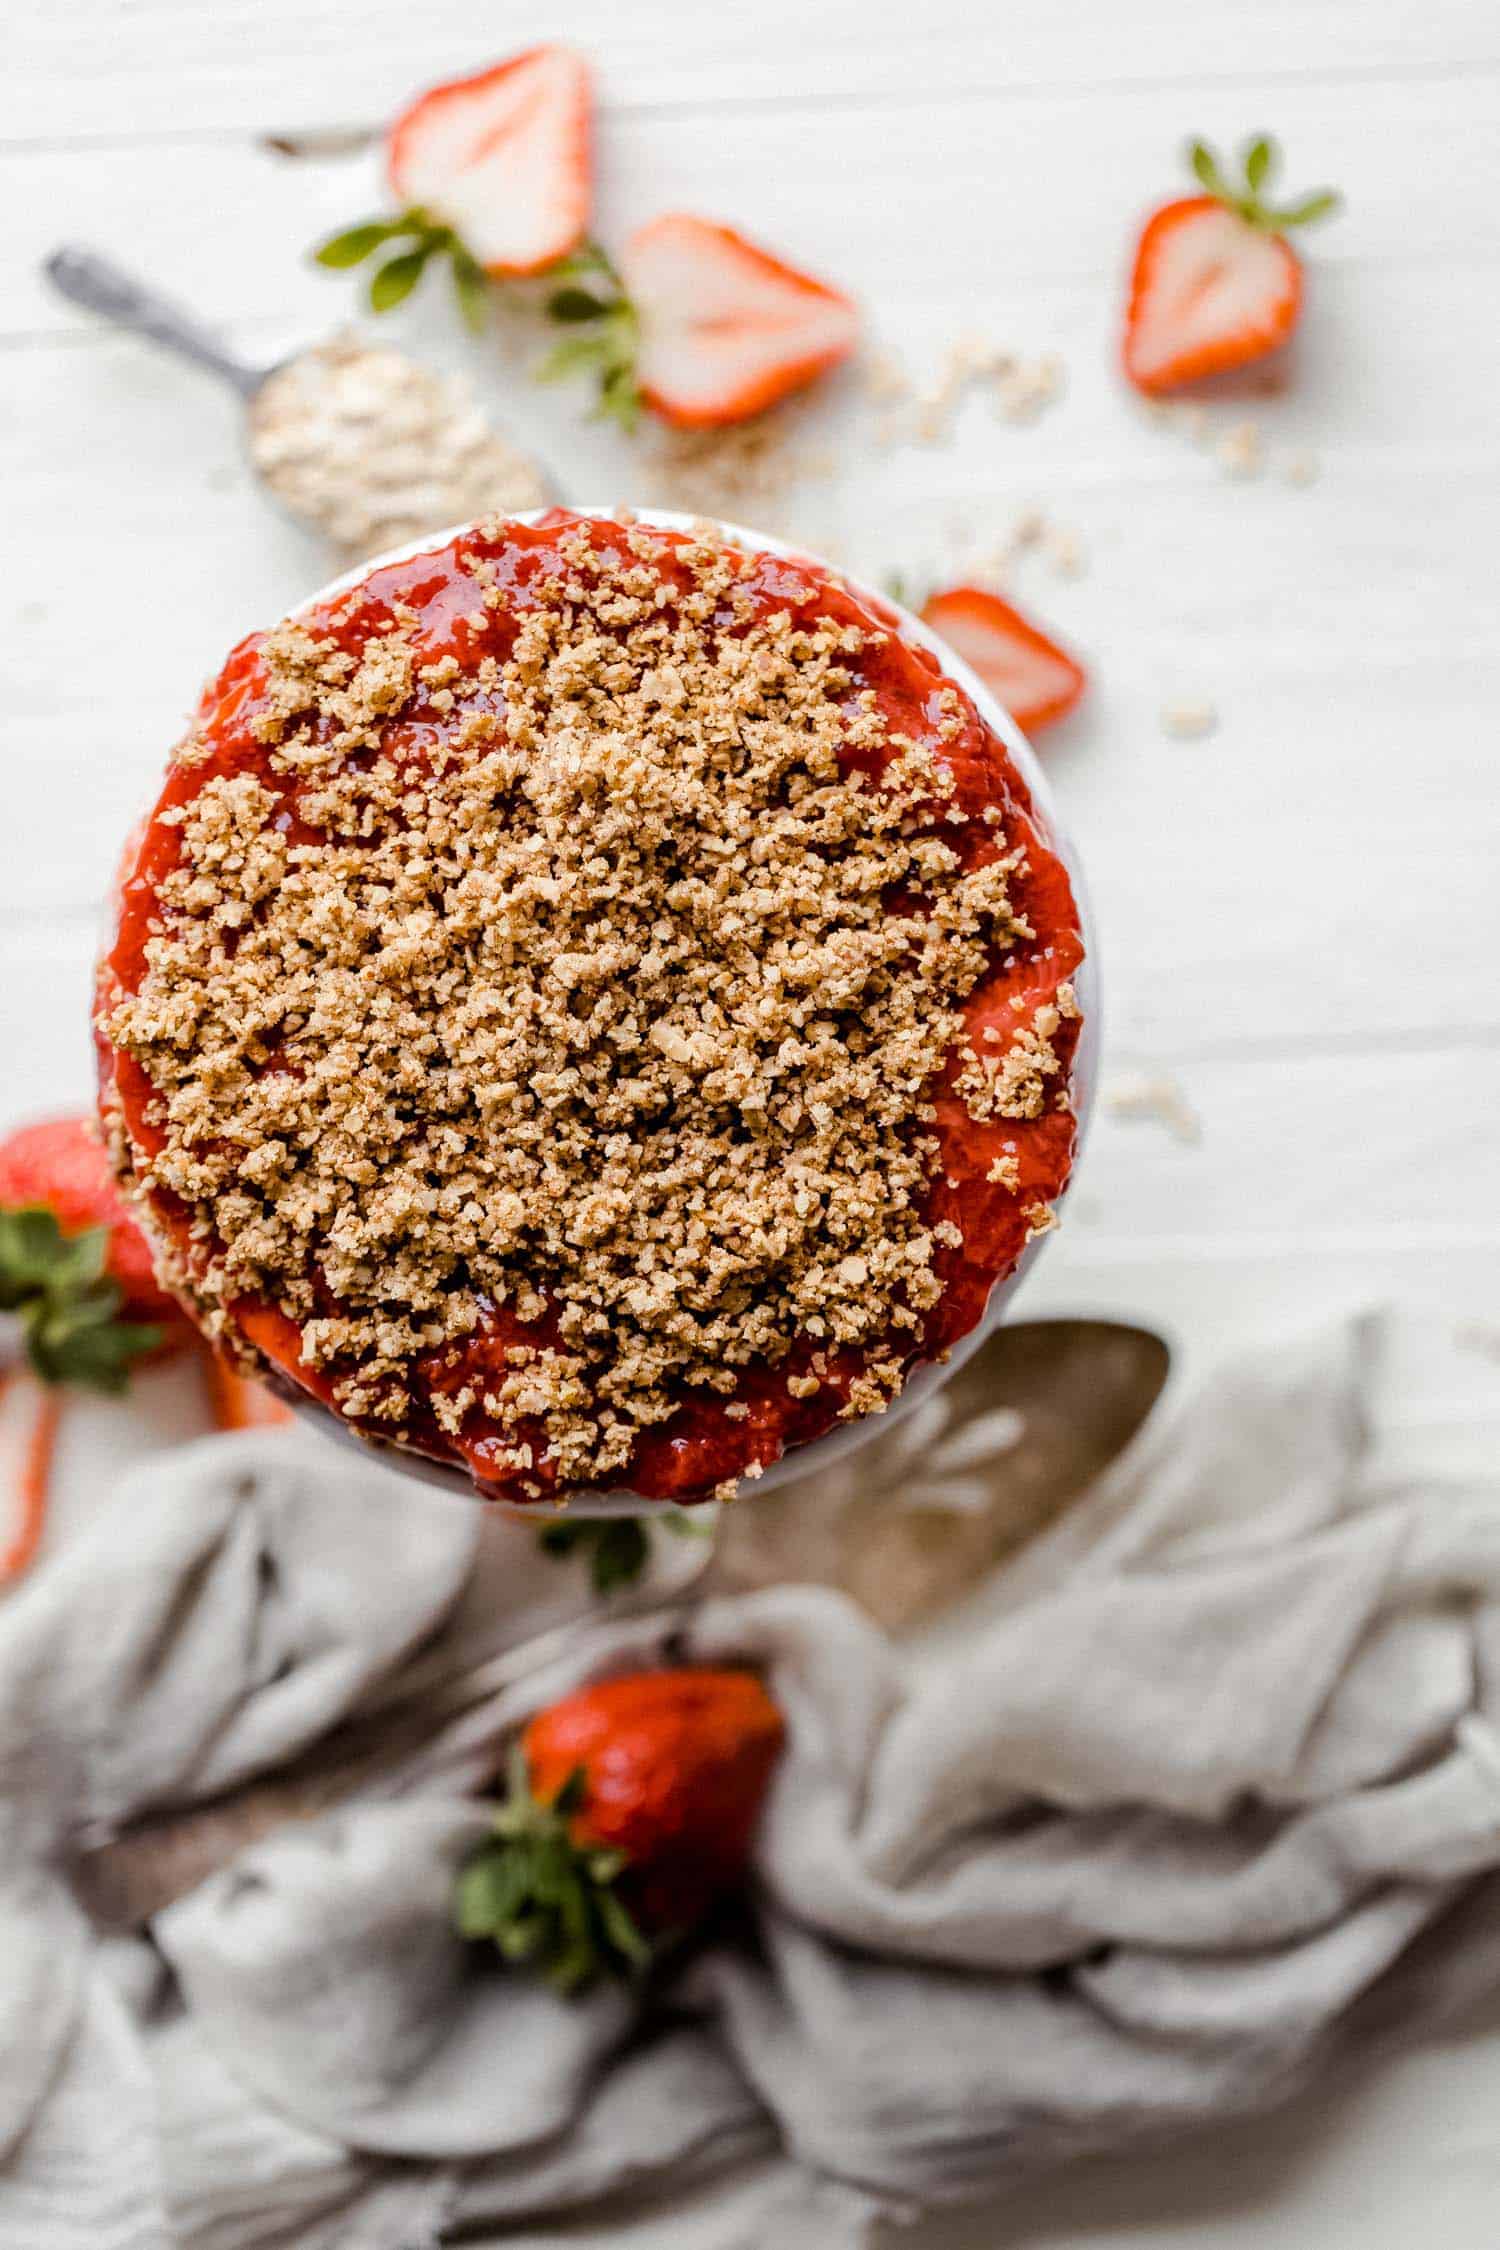 vegan strawberry cheesecake with oat crumble on top